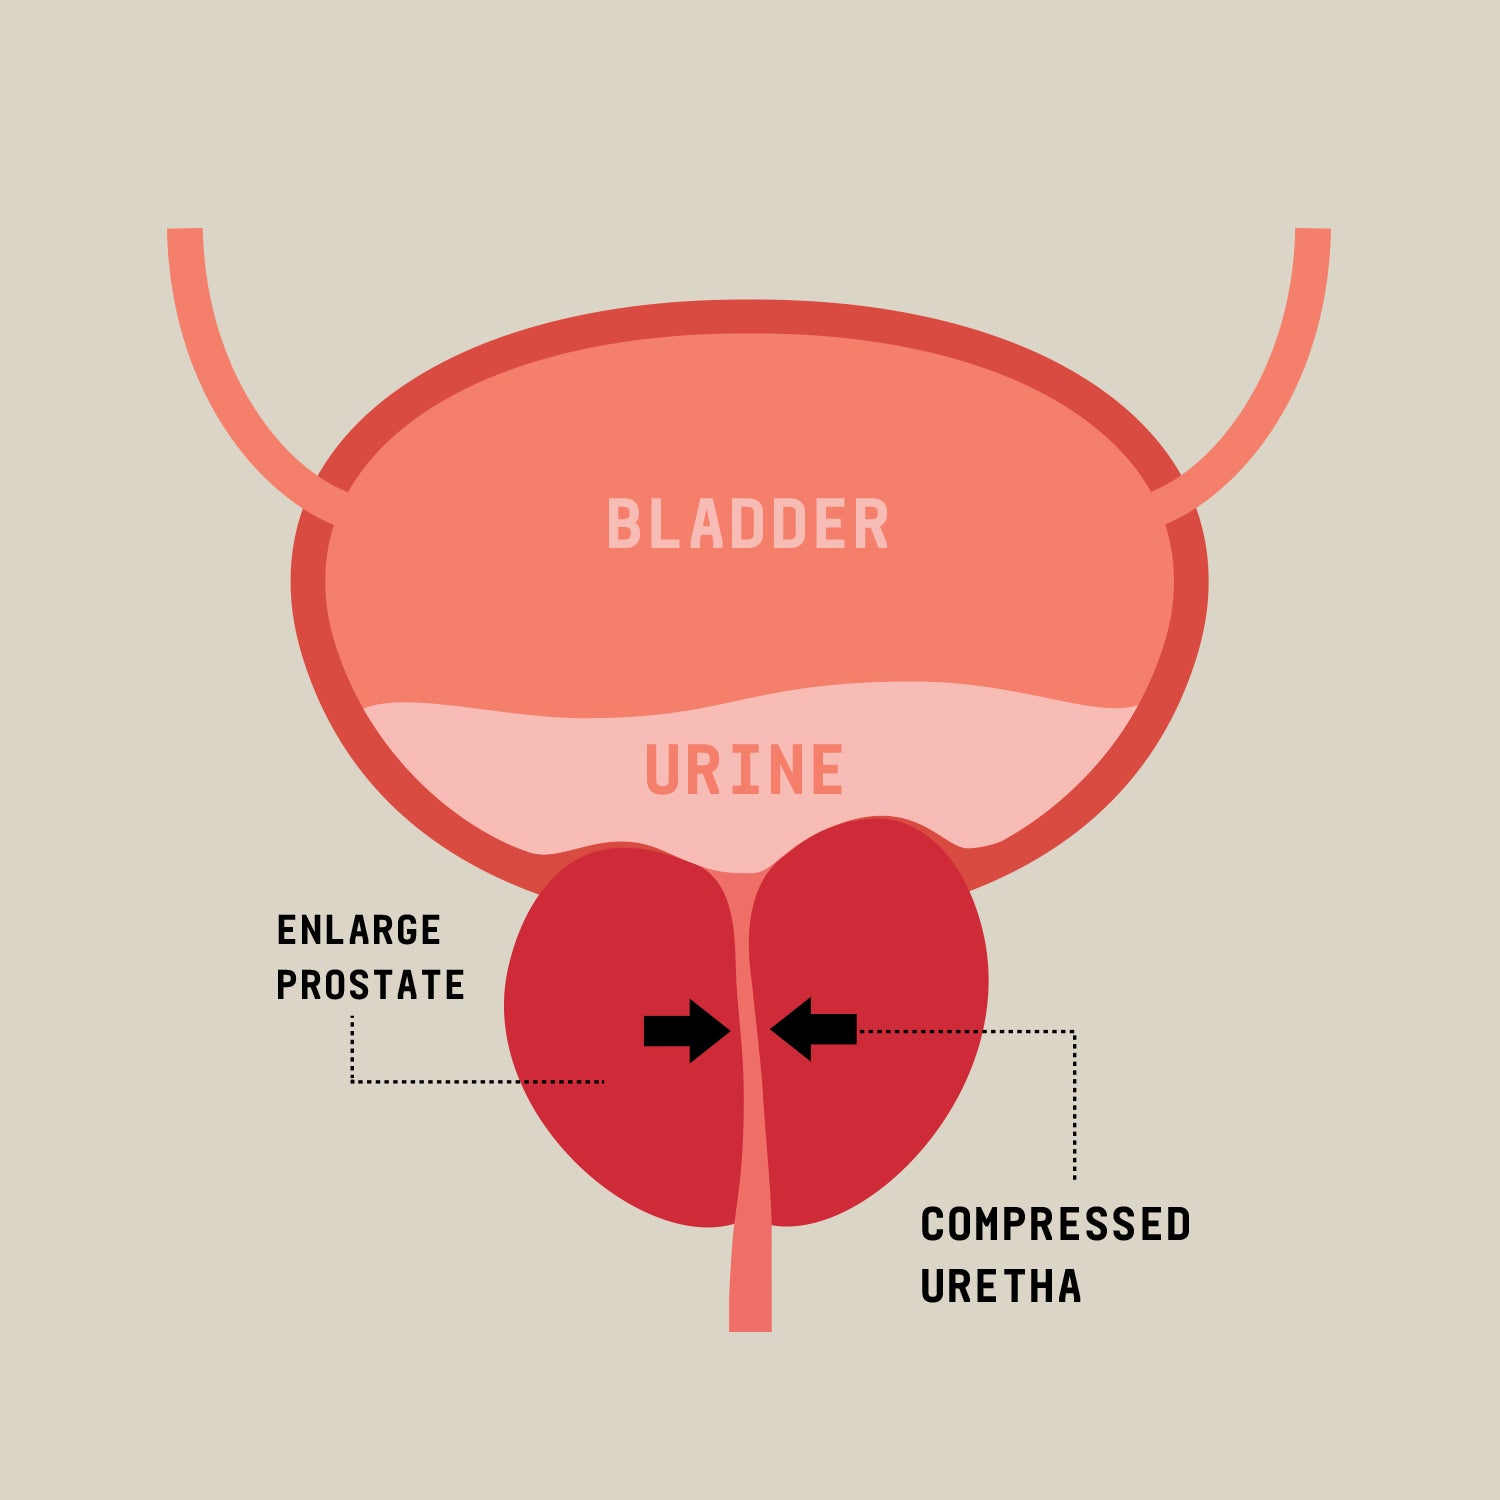 Incomplete emptying of the bladder, Blood in the urine, Recurrent urinary tract infections, Frequent sharp pain